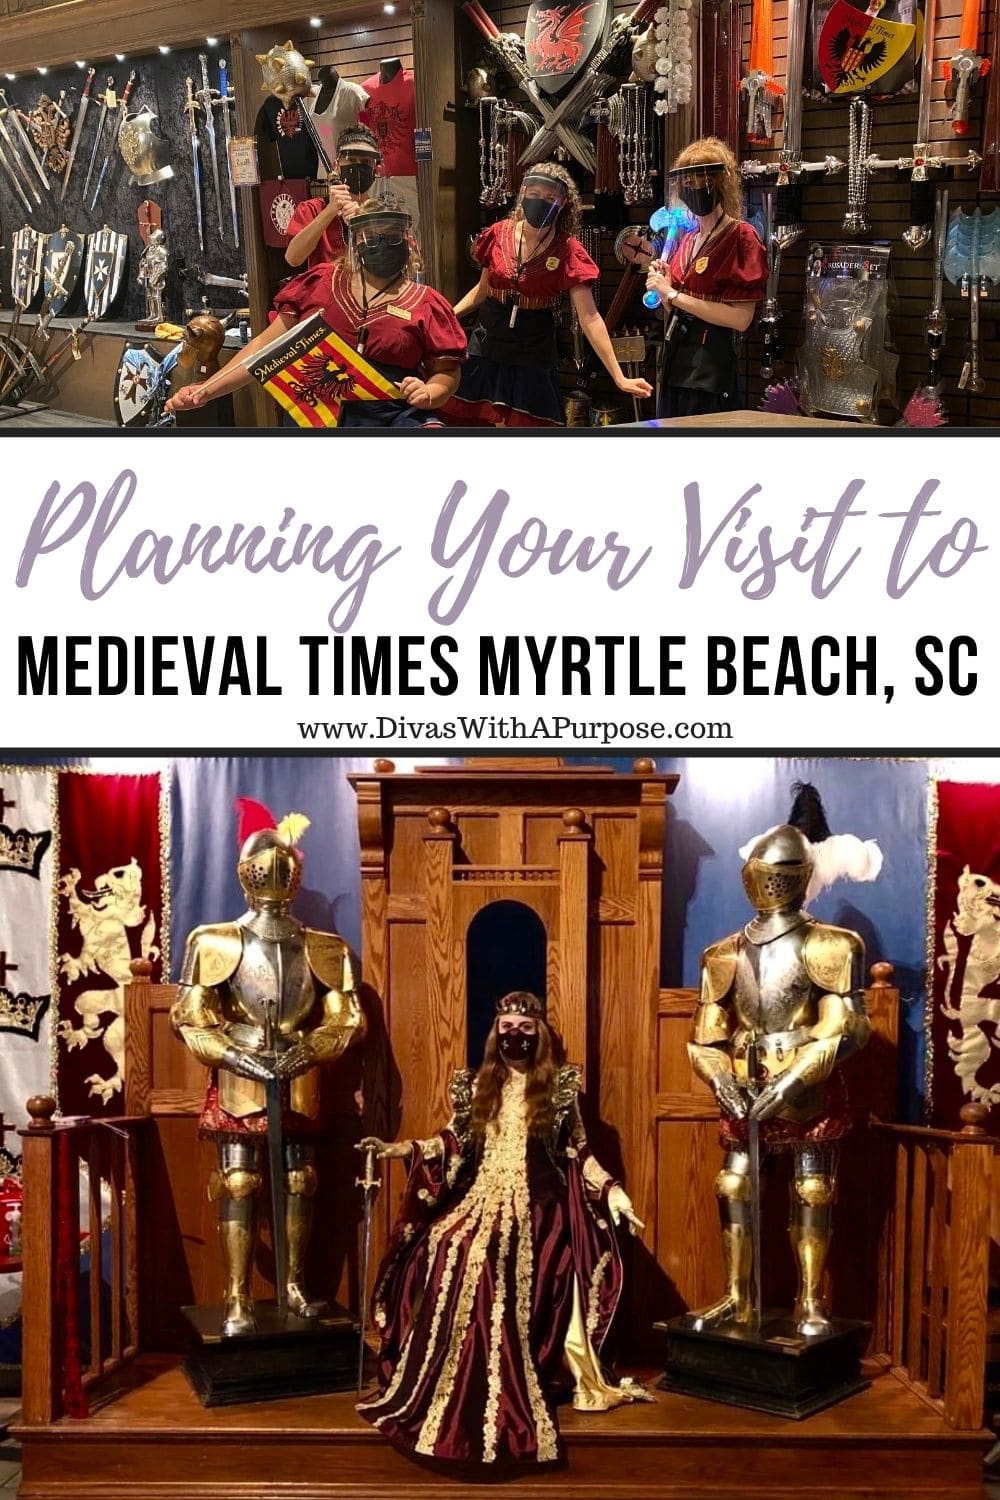 Are you planning a visit to Medieval Times Myrtle Beach? Here are the safety protocols they have in place to keep you and yours safe.